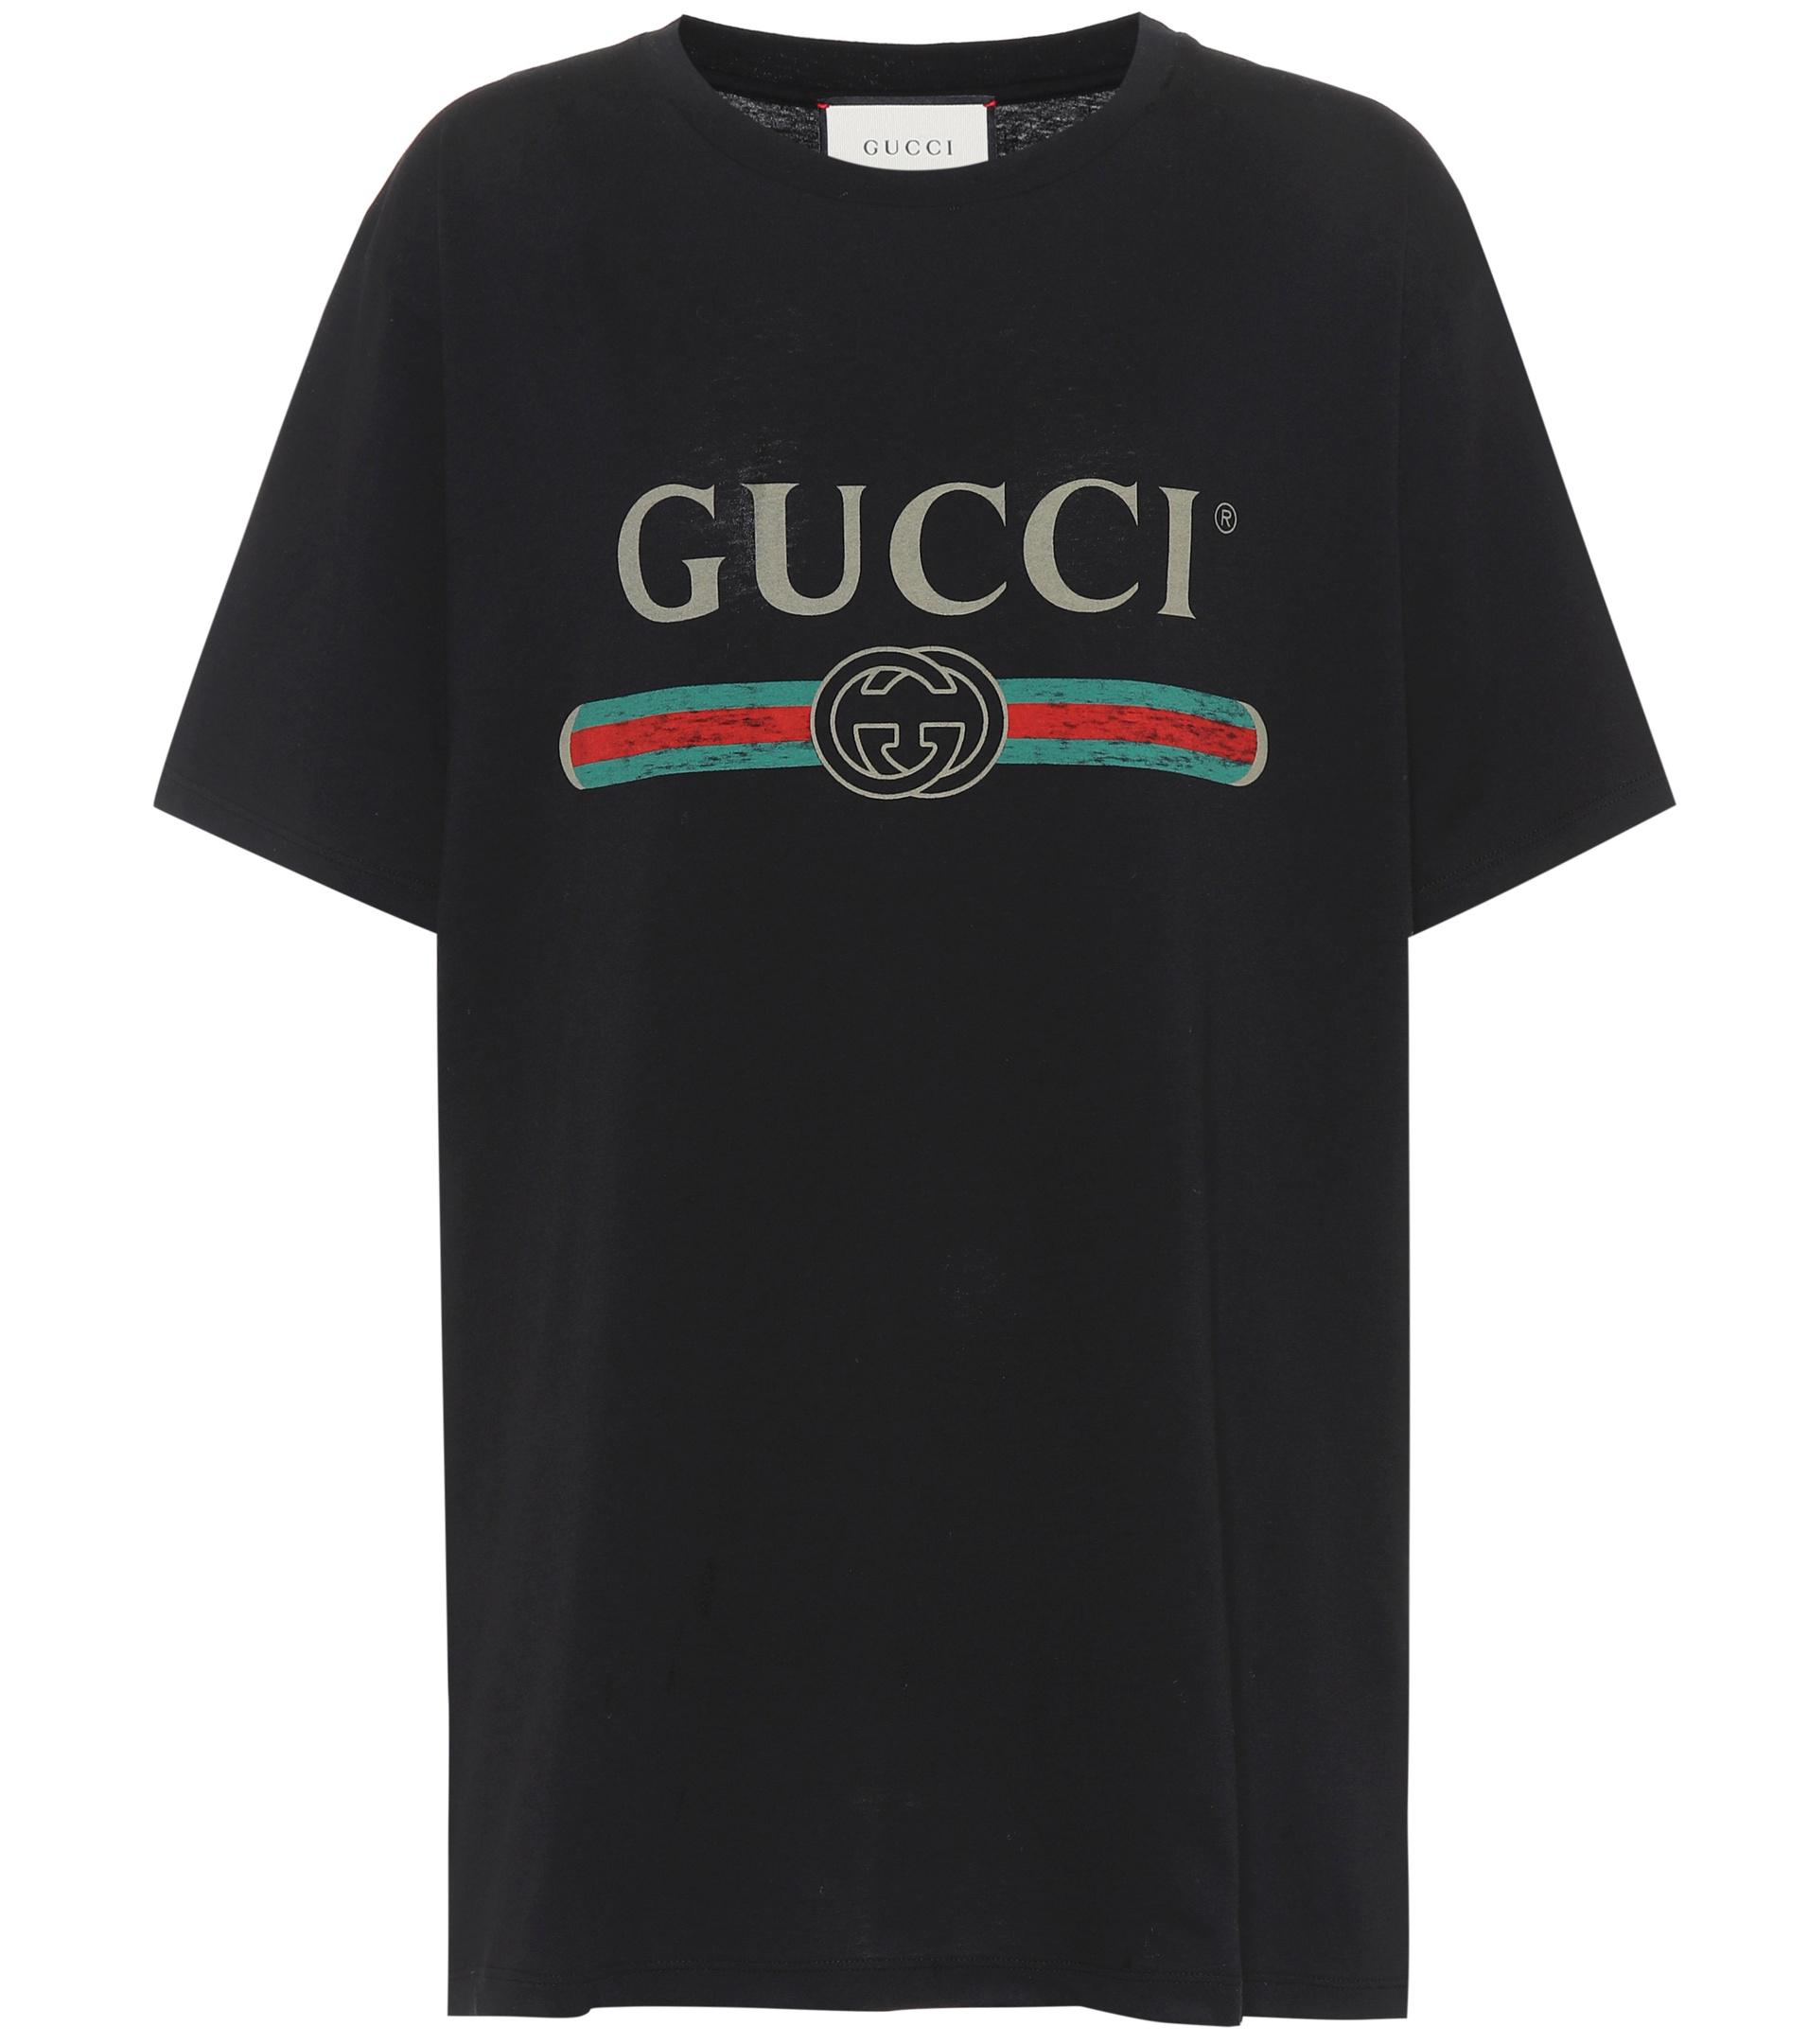 Gucci Cotton Oversized Logo T-shirt in Black - Save 40% - Lyst